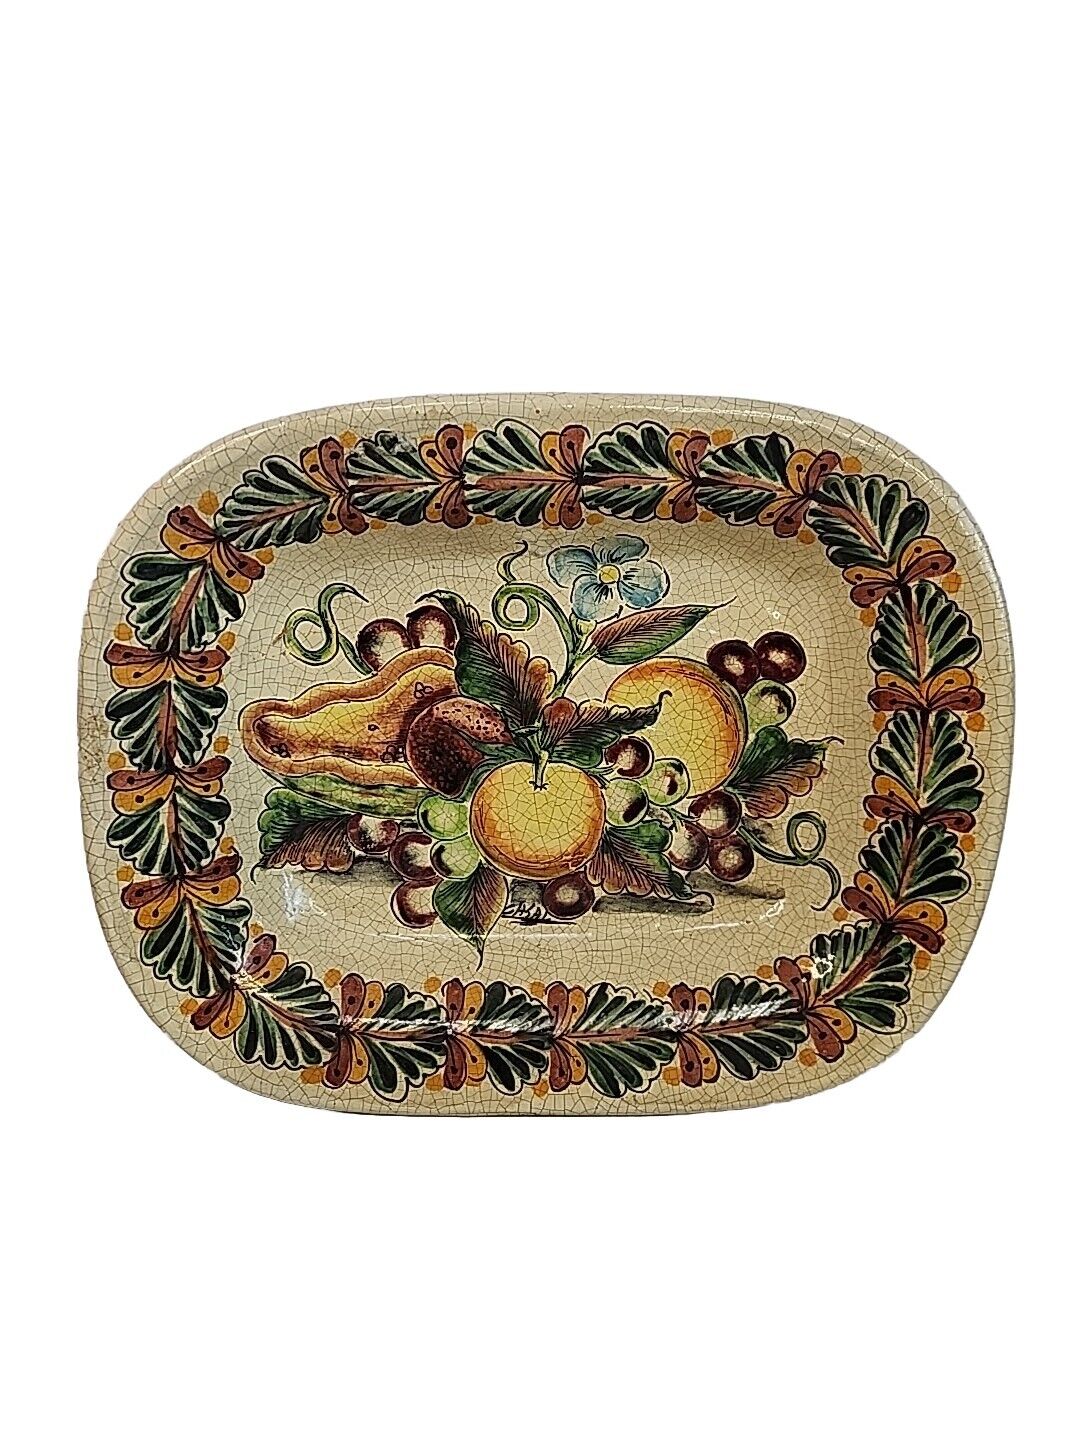 Vintage Casal Made In Mexico Decorative Flowers & Fruit Platter 18.5 